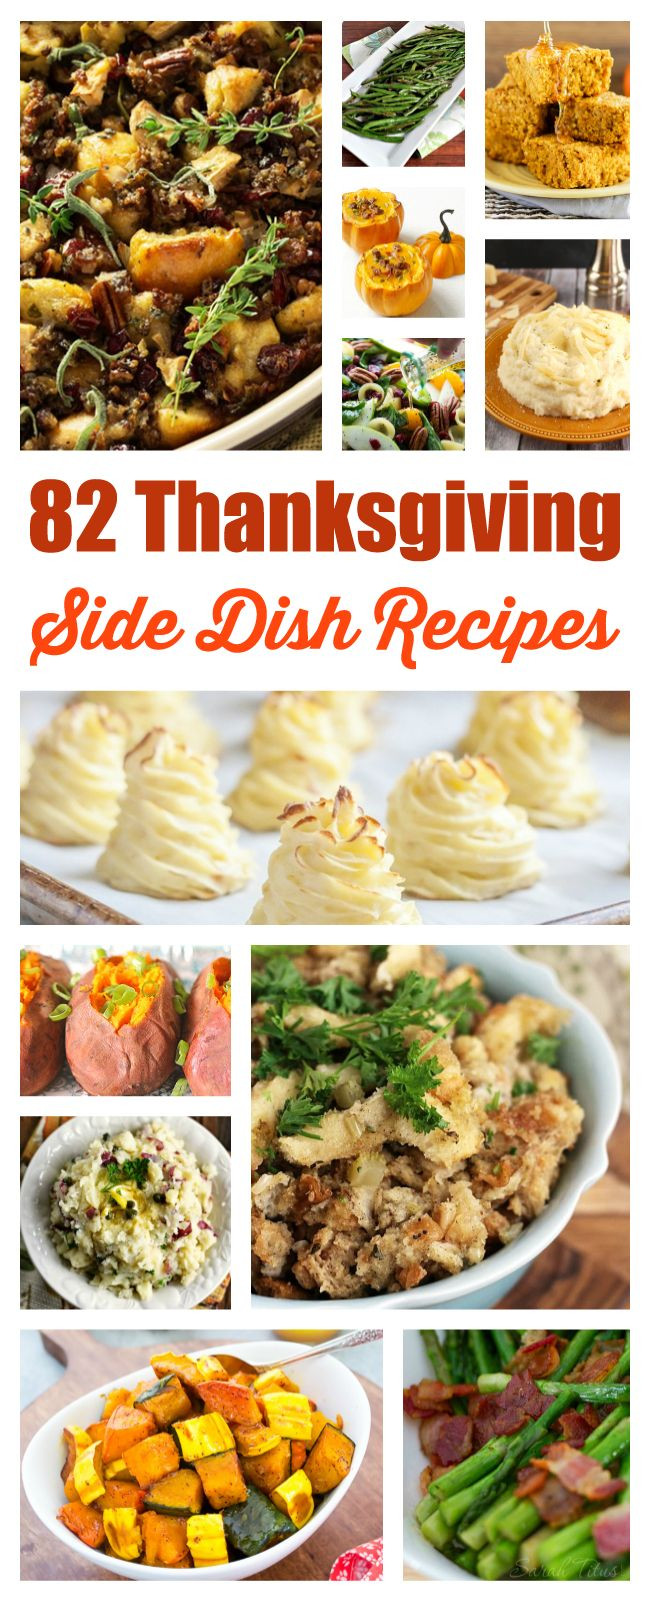 Best Side Dishes For Thanksgiving
 71 best images about Thanksgiving Sides with a Twist on